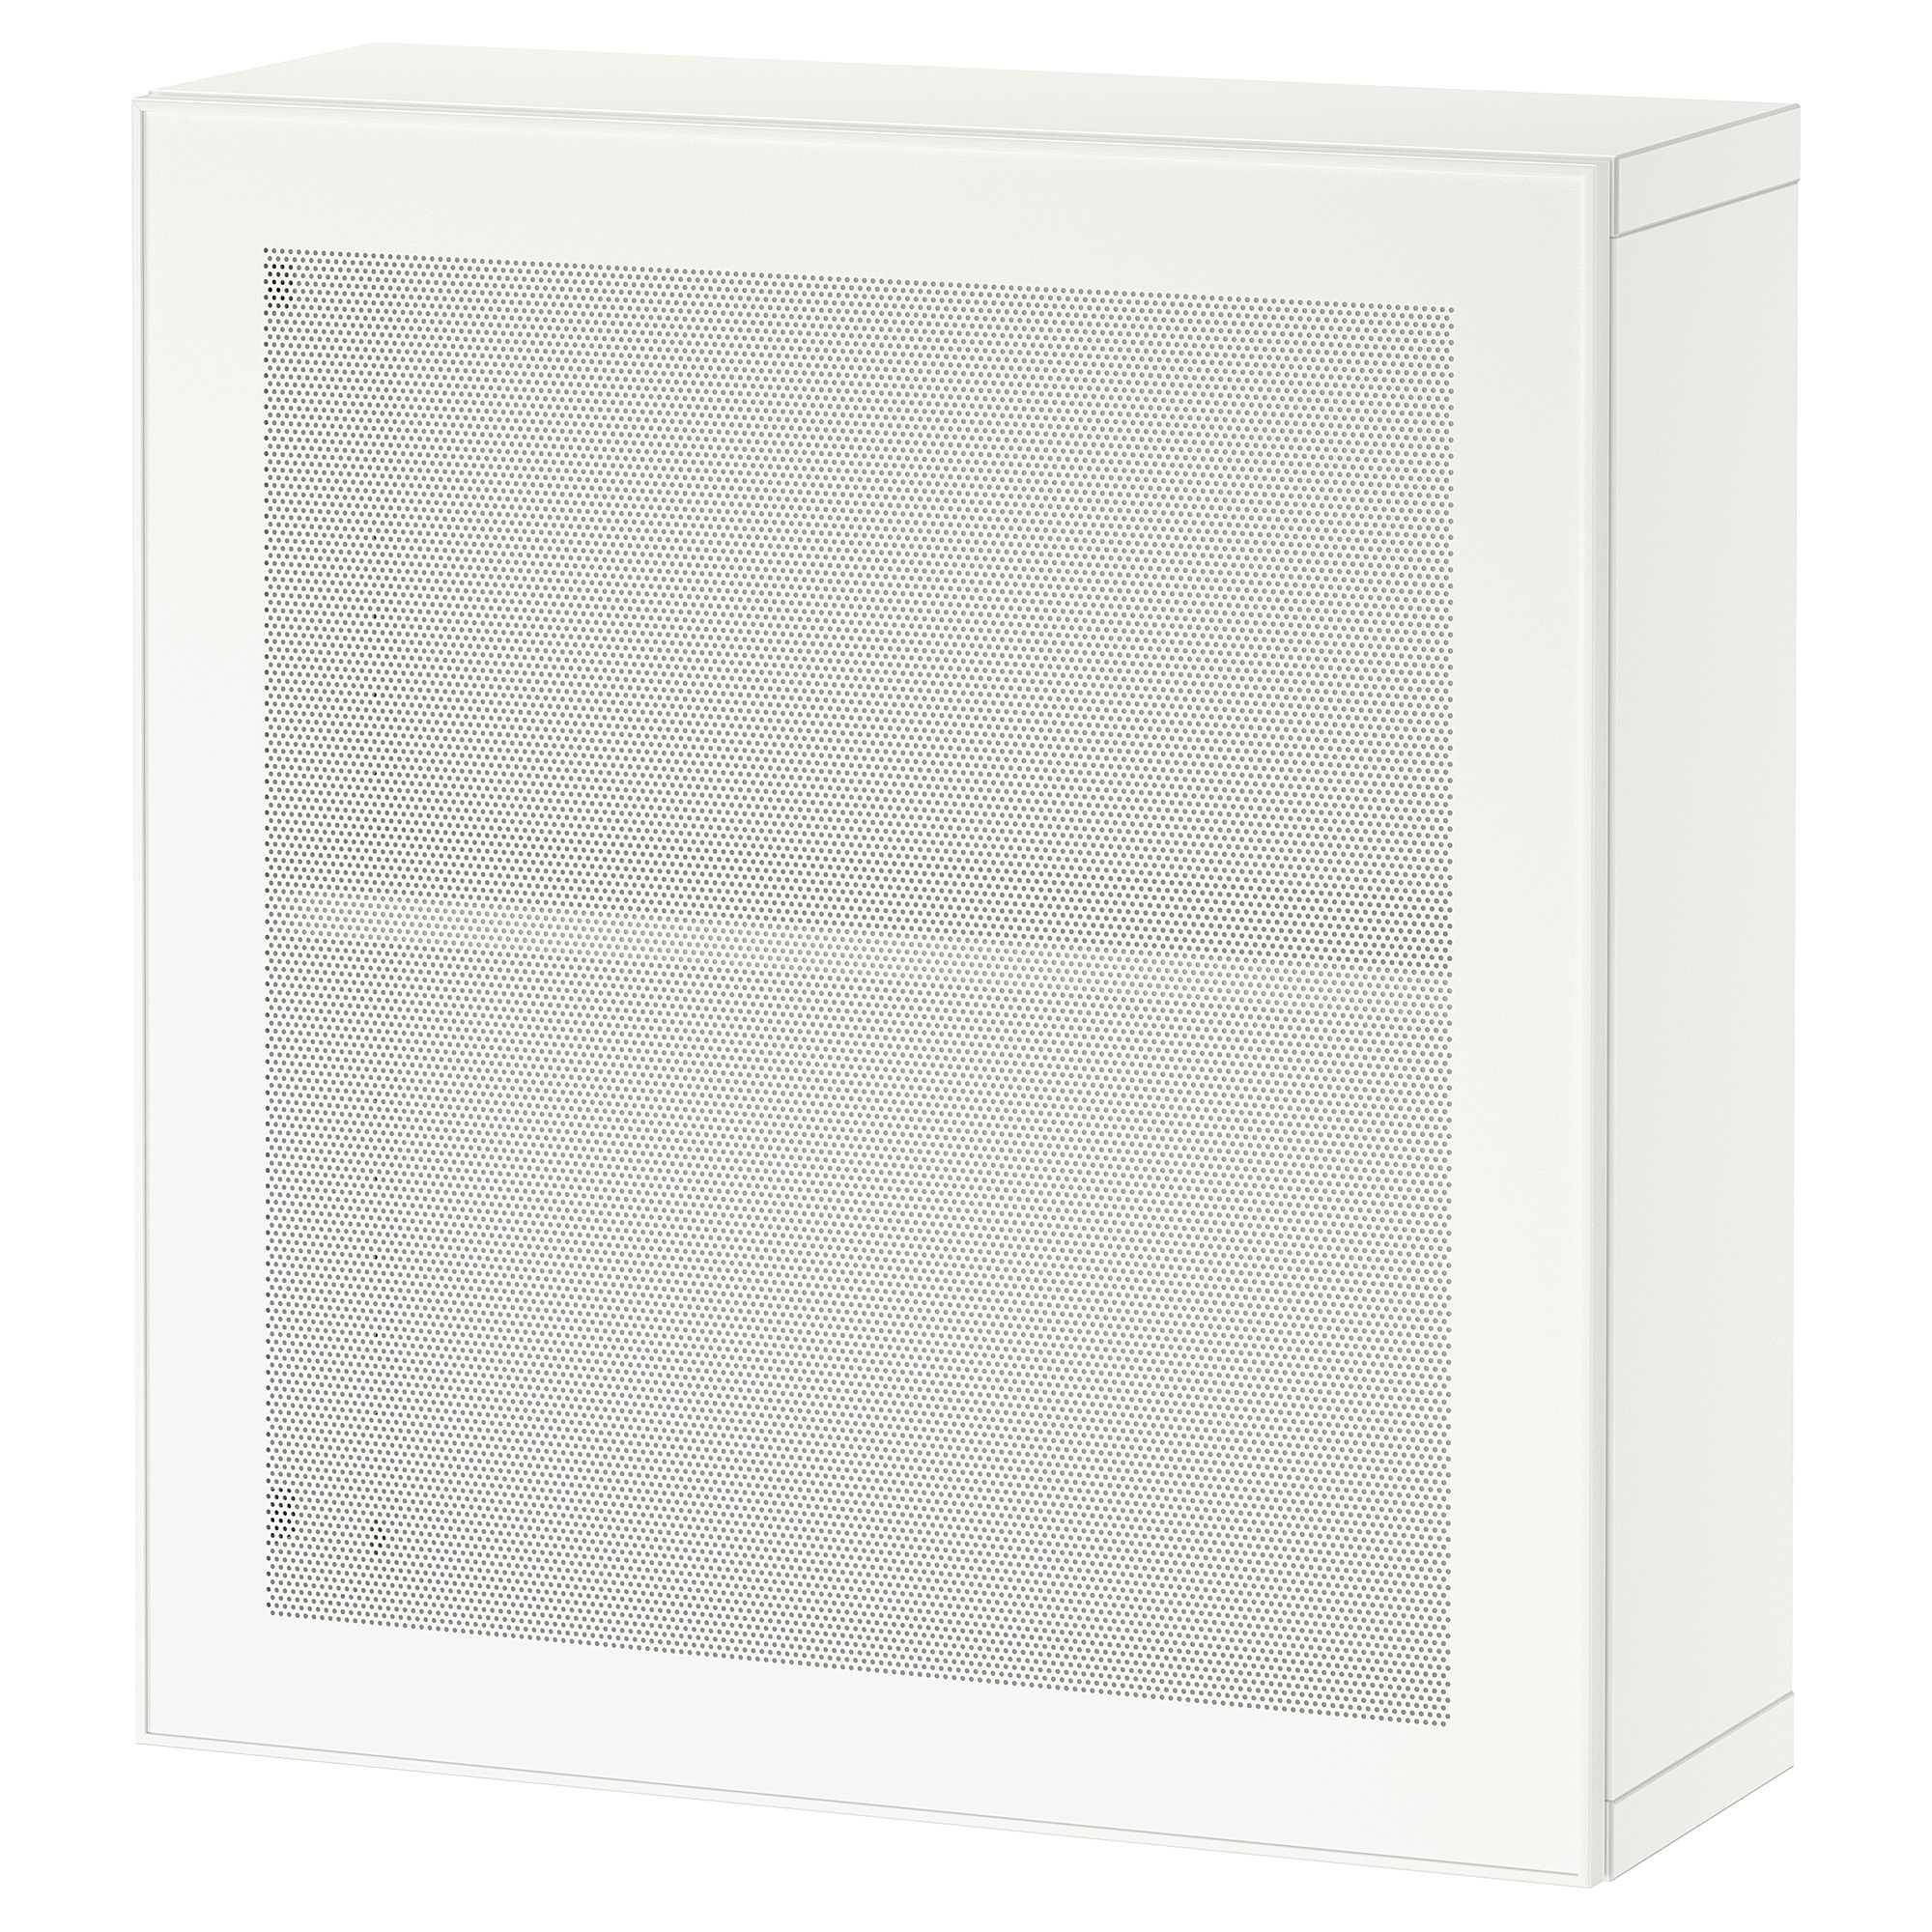 BESTÅ wall-mounted cabinet combination